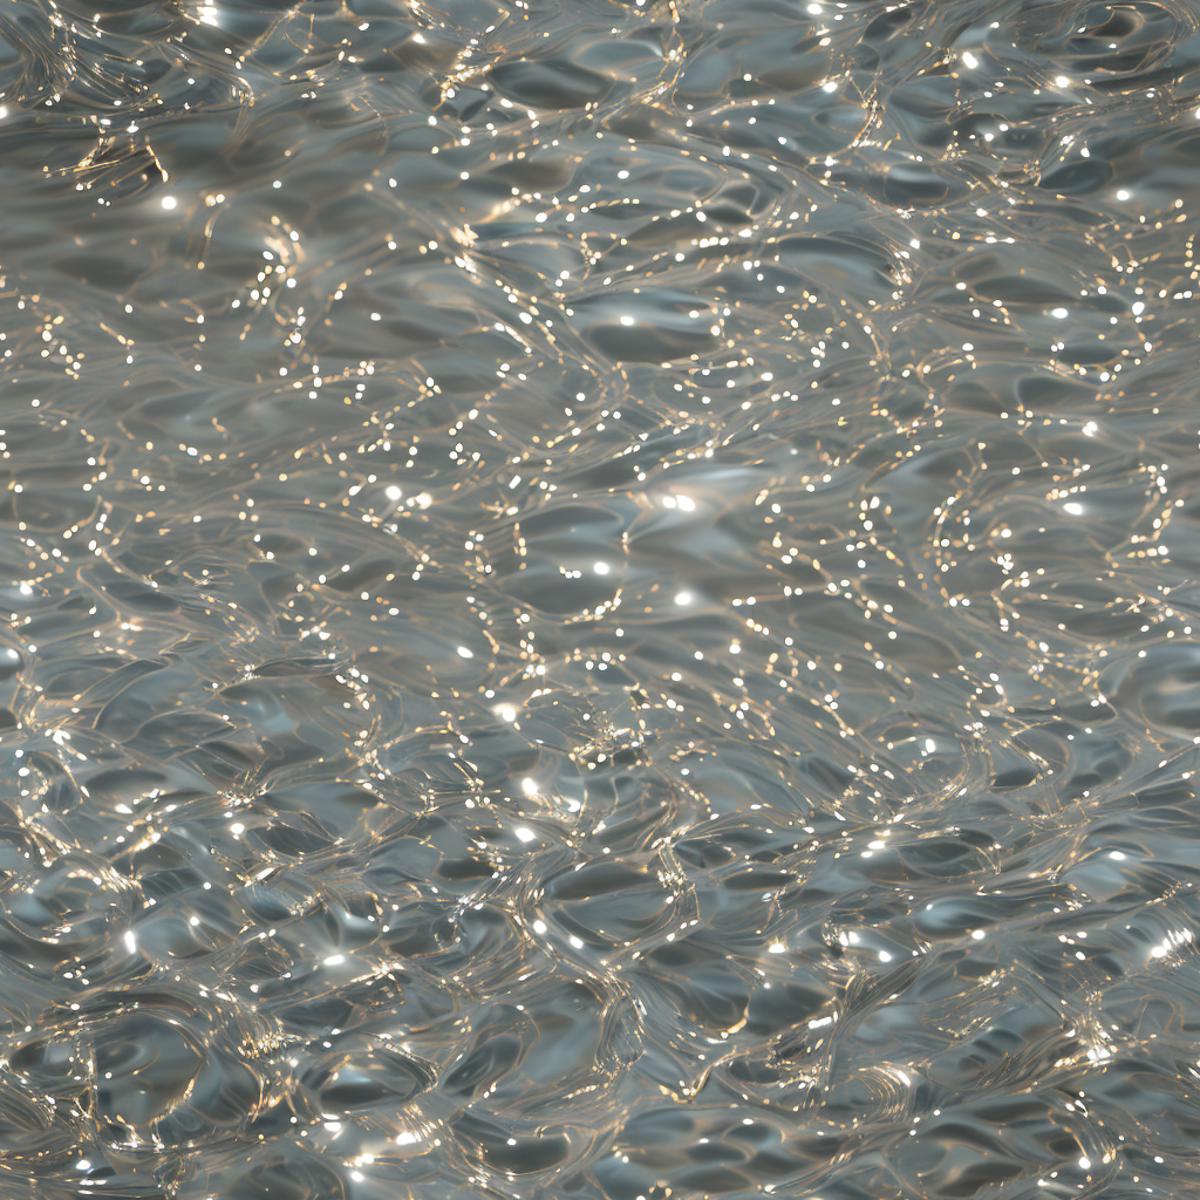 NVJOB Water v1.0. To create a seamless water material texture. image by nick_veselov